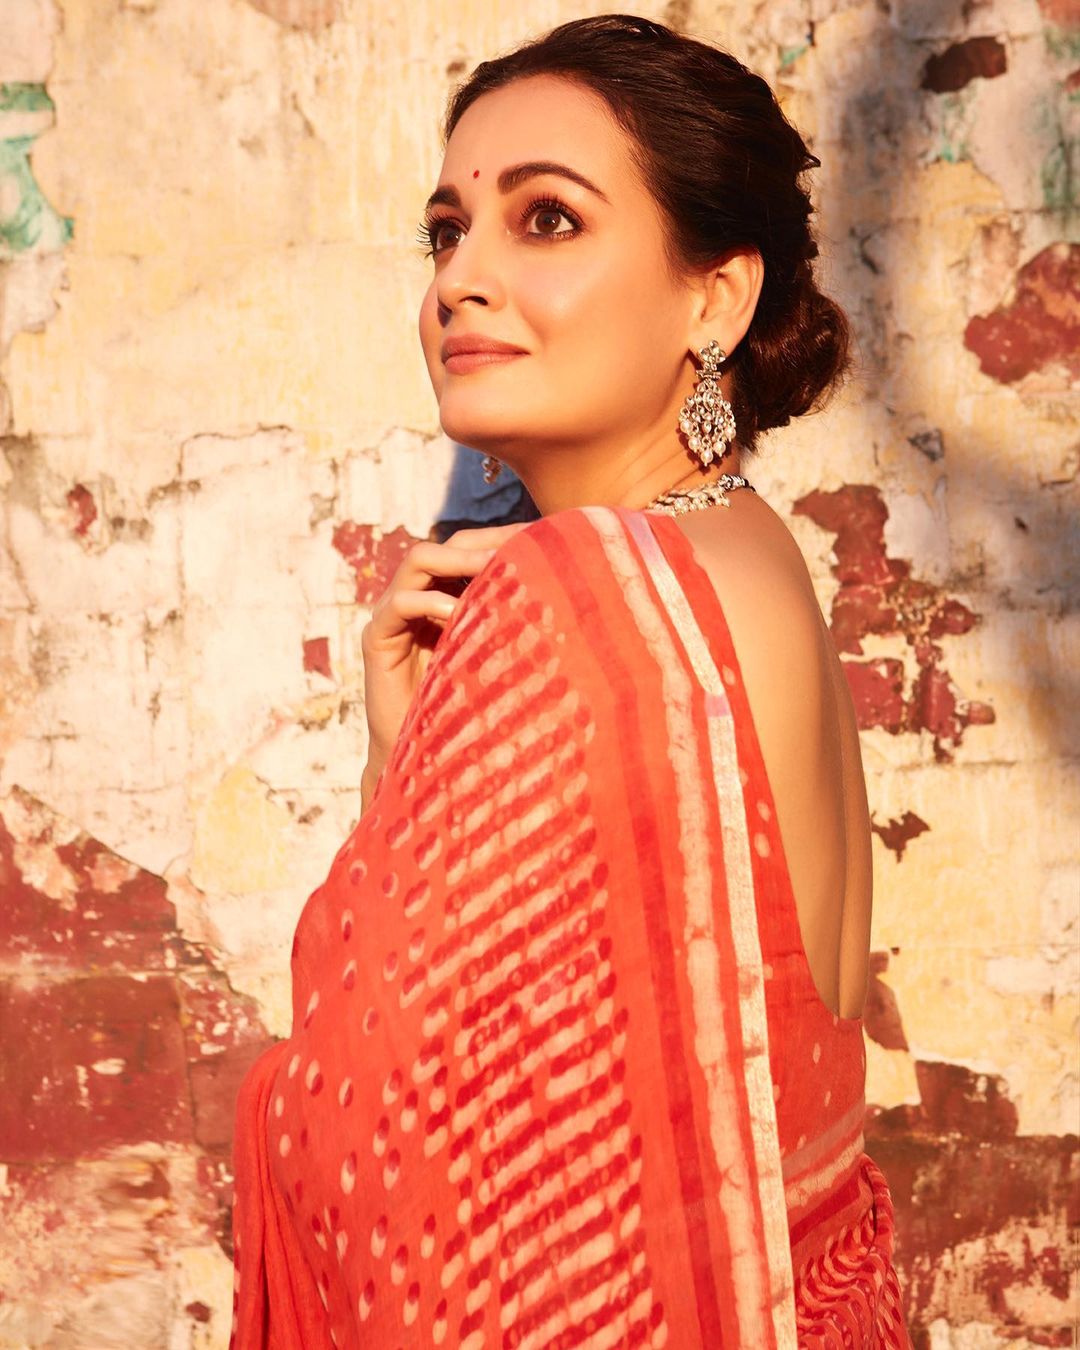 dia-mirza-steals-breaths-in-red-handcrafted-saree-as-she-promotes-bheed